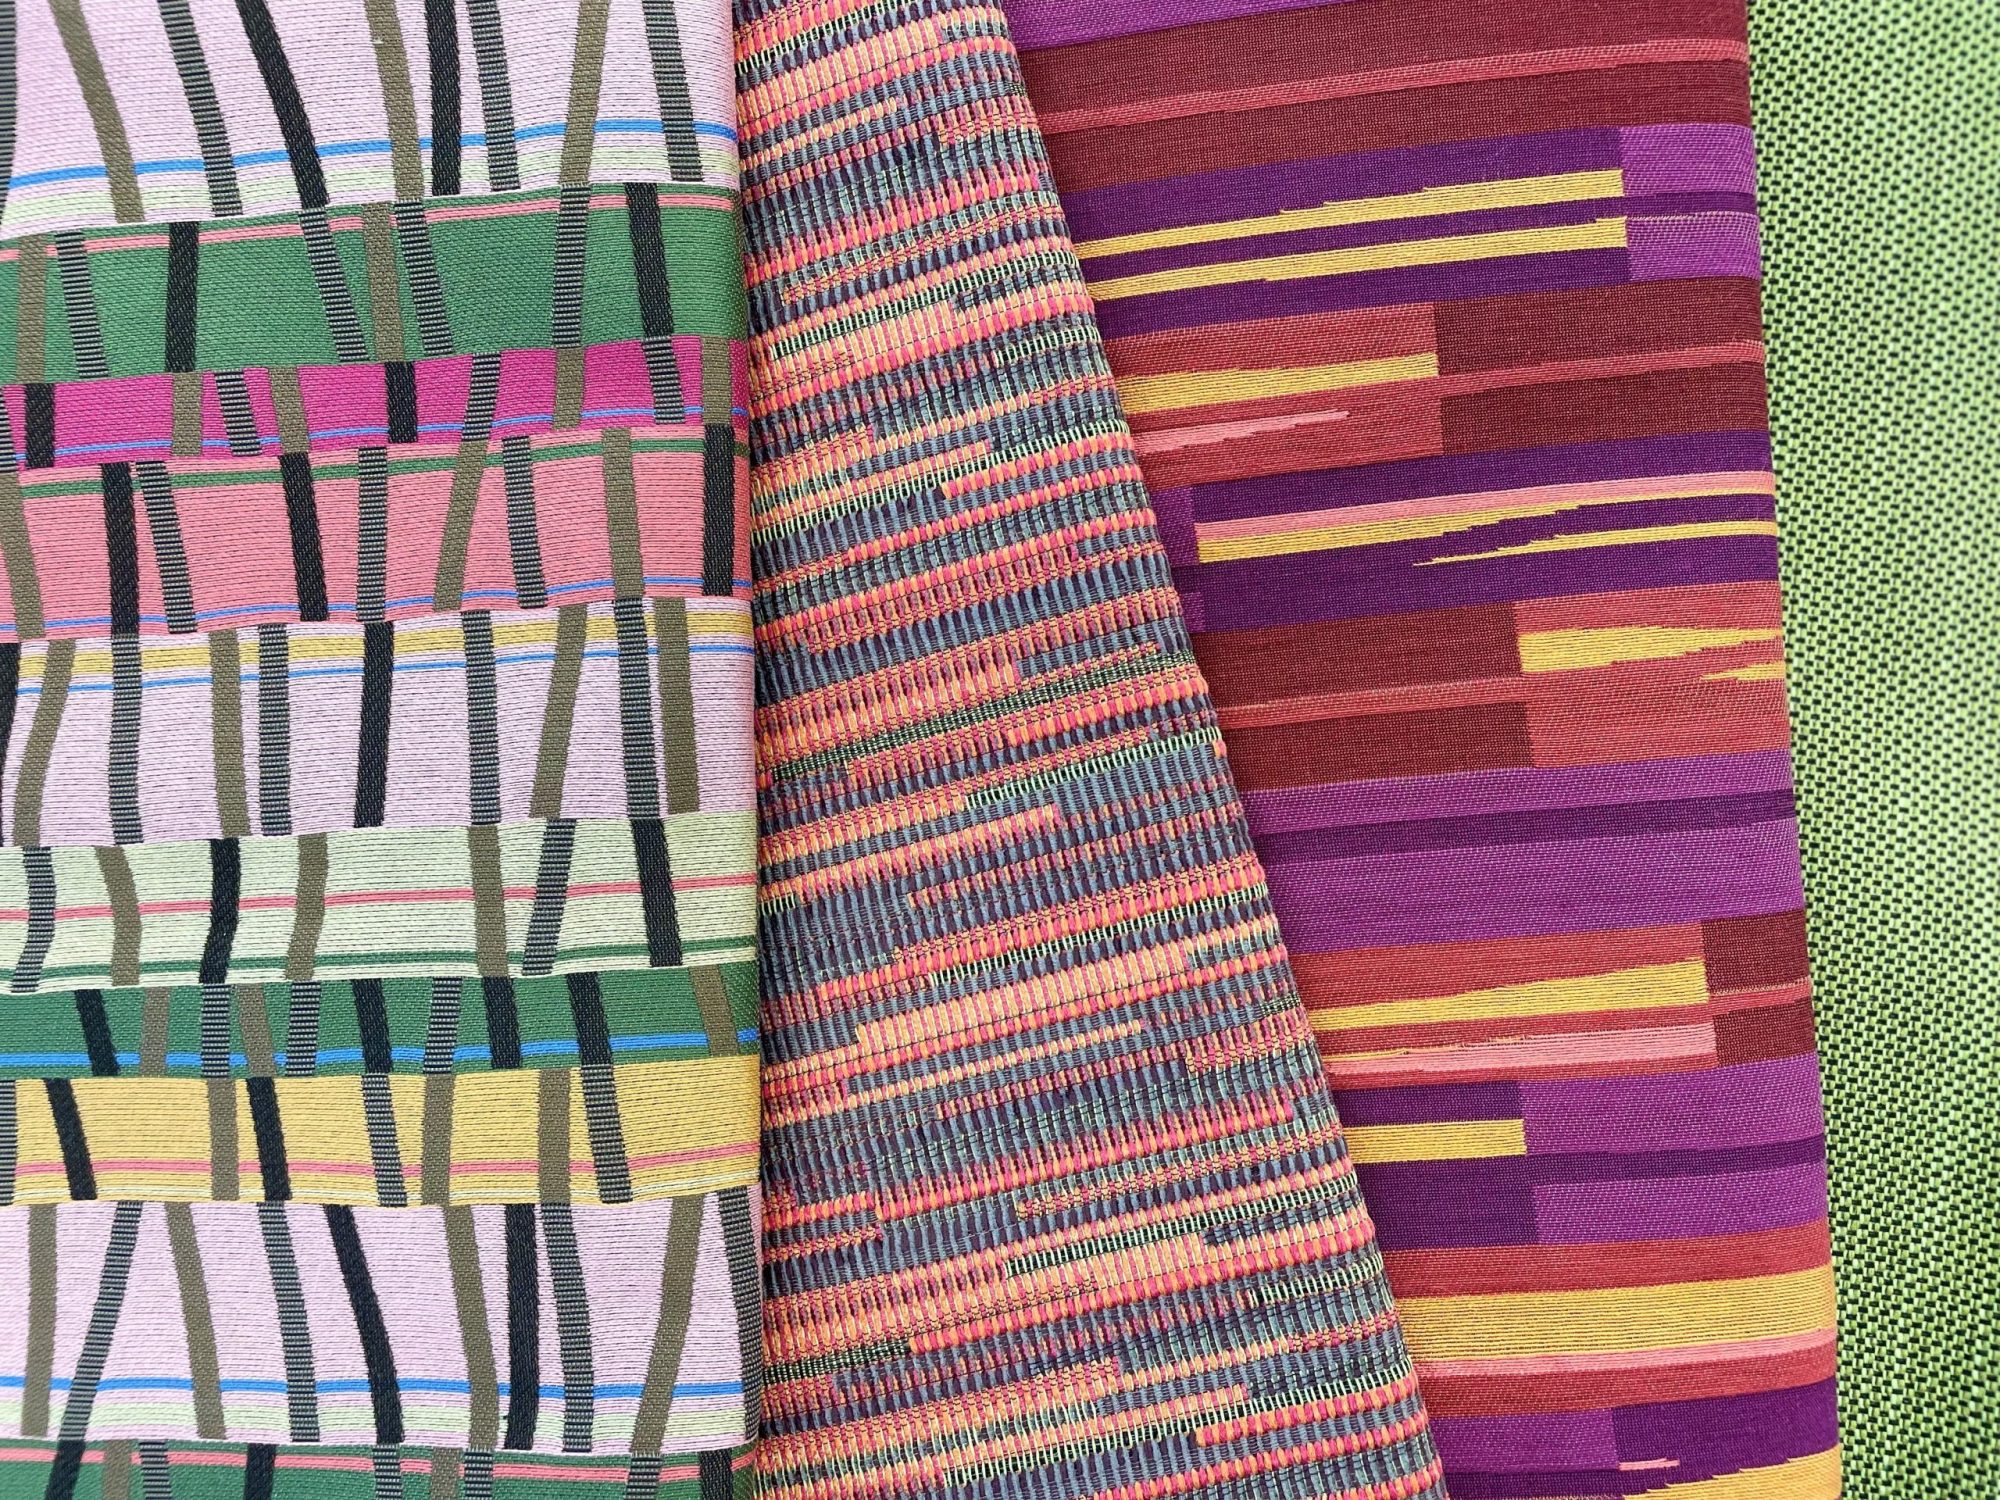 colorful patterned fabric